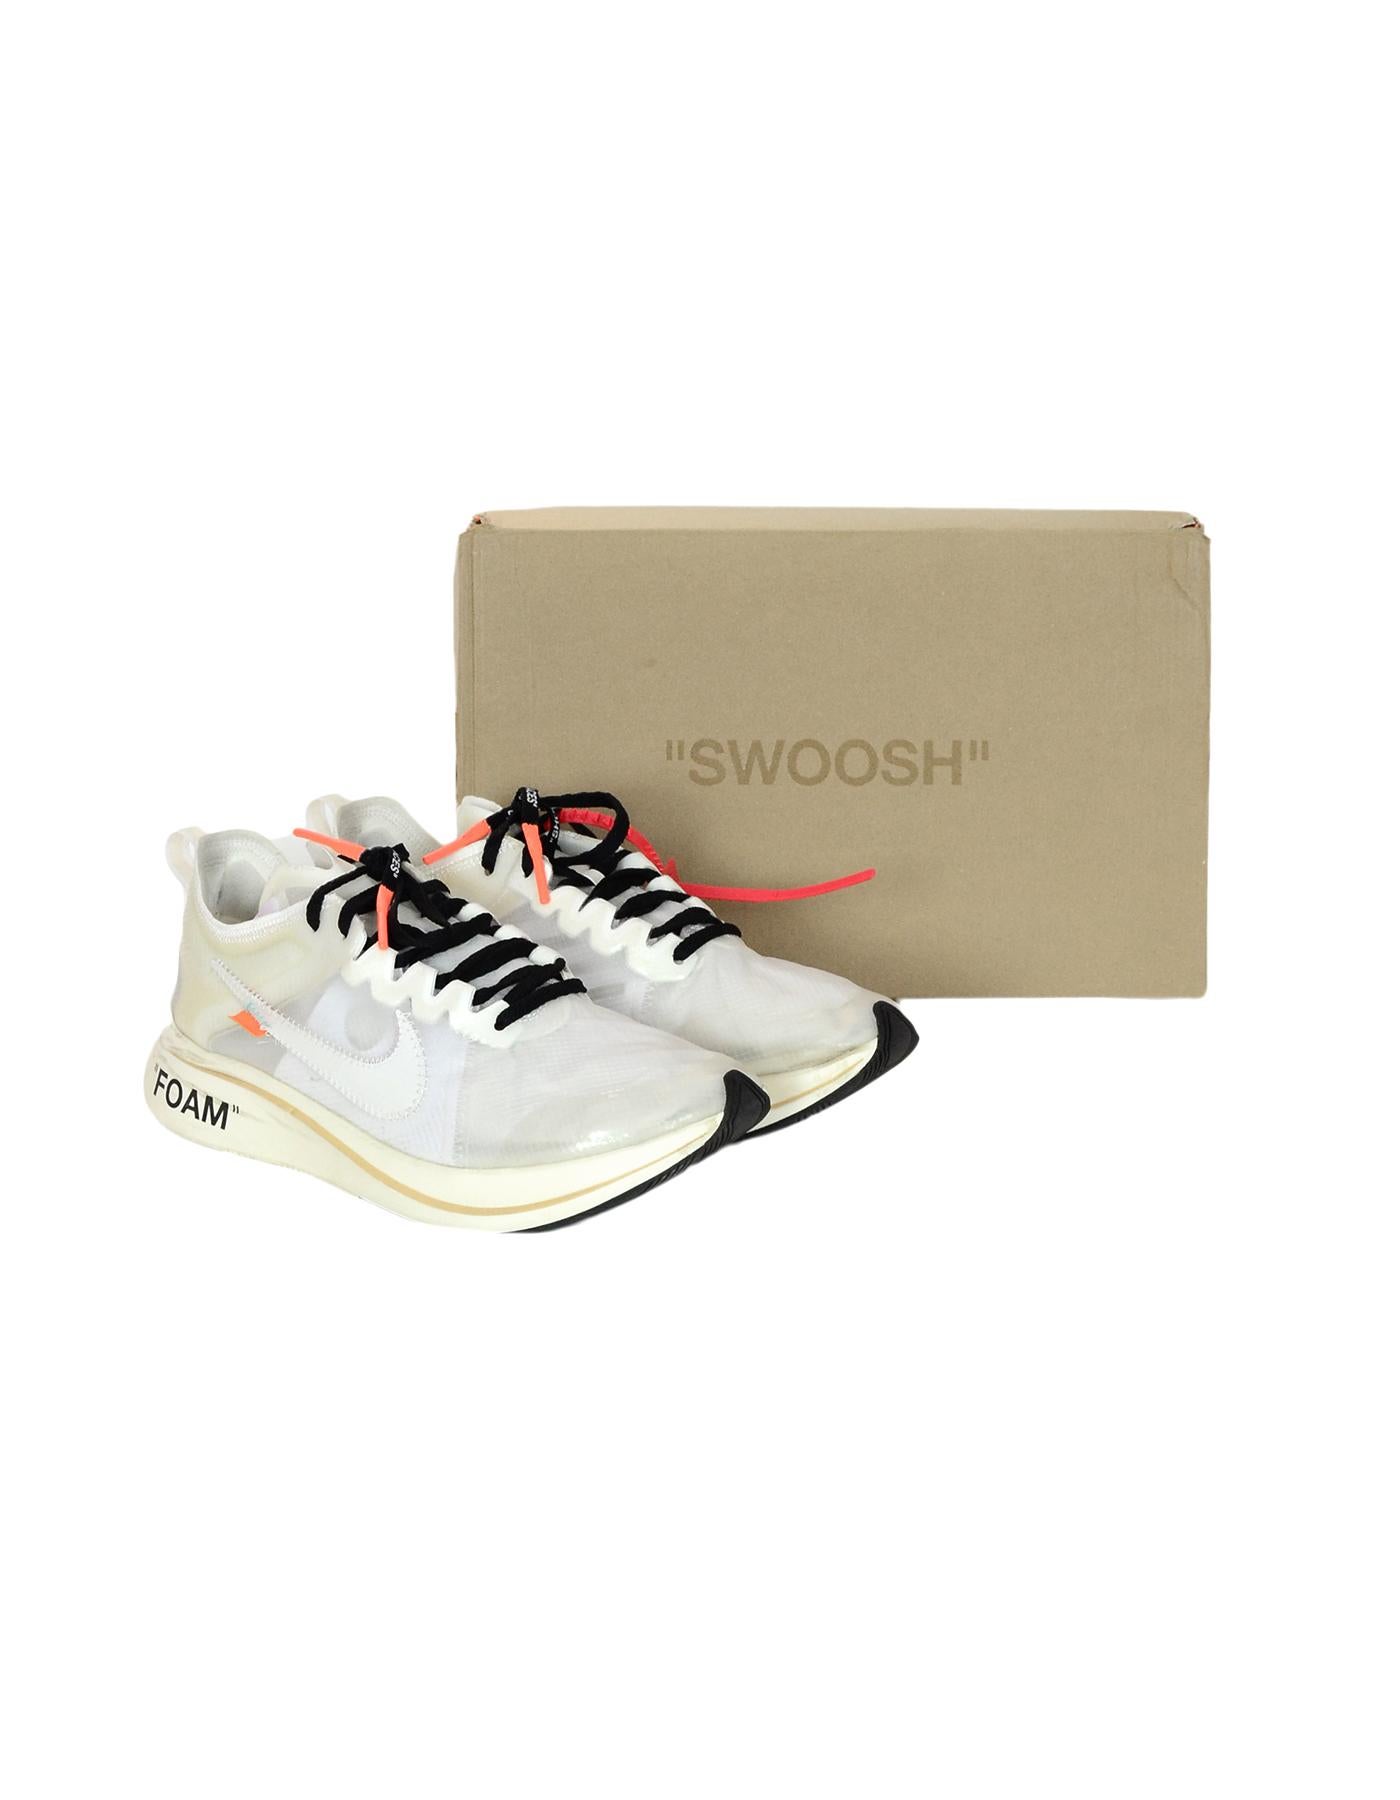 Nike x Off-White Men's Muslin 2017 Zoom Fly Promo/Sample Sneakers Sz 10

Made In: Vietnam
Year of Production: 2017
Color: White/black
Materials: Muslin, rubber
Closure/Opening: Lace up
Overall Condition: Excellent pre-owned condition with exception